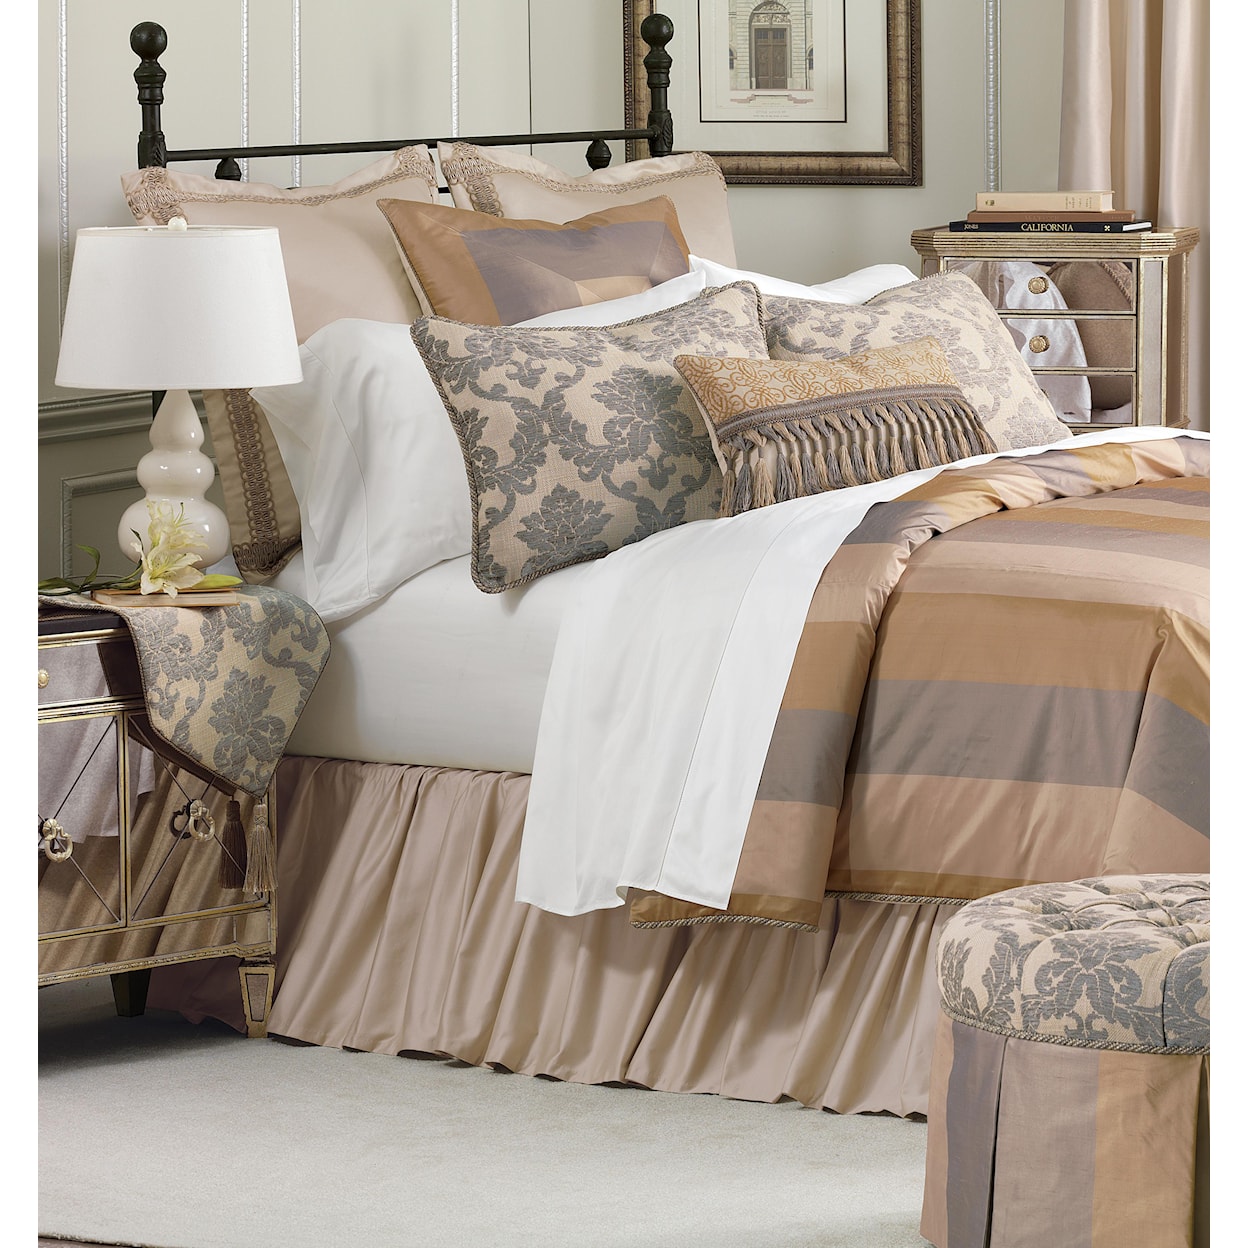 Eastern Accents Lancaster Queen Bed Skirt